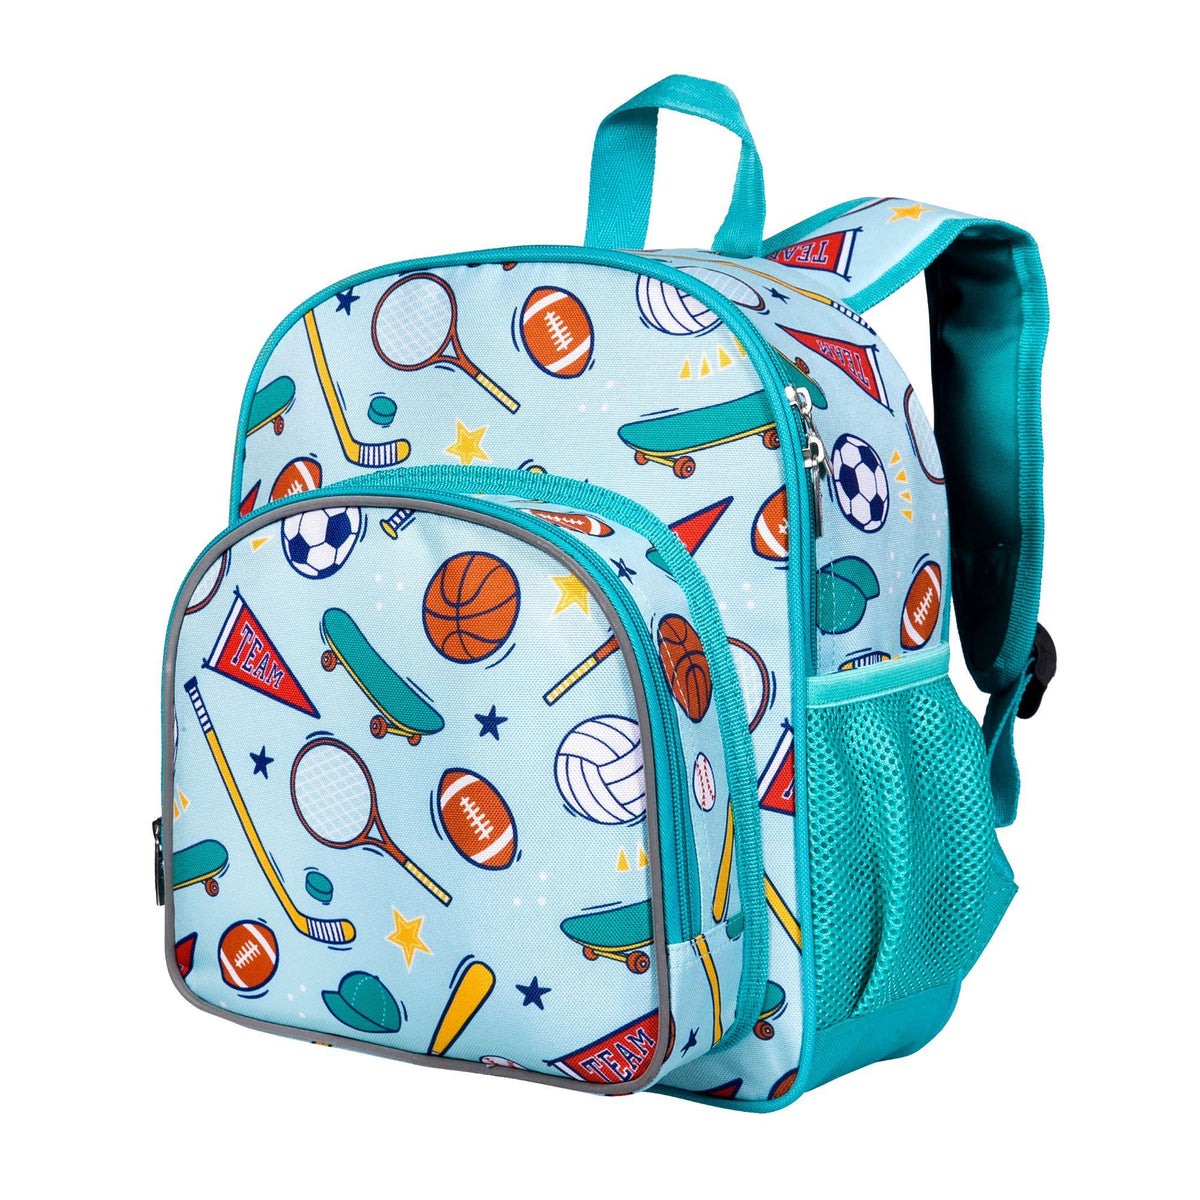 Wildkin 12-inch Kids Backpack , Perfect For Daycare And Preschool